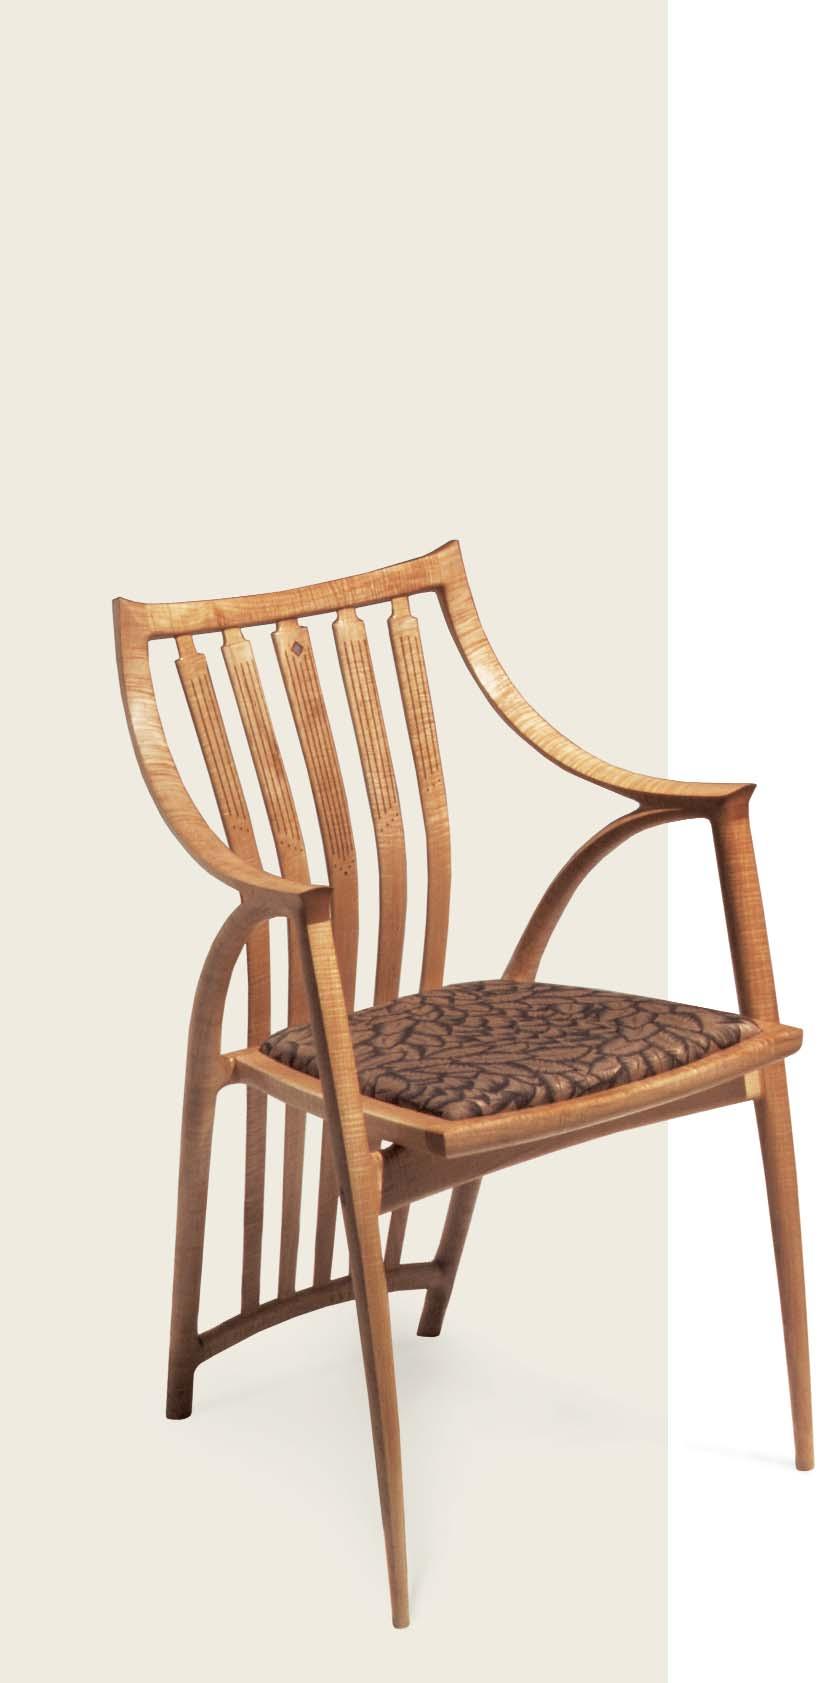 A Slim,Comfortable This system works for most chairs and uses common materials An upholstered slip seat complements a beautiful chair.